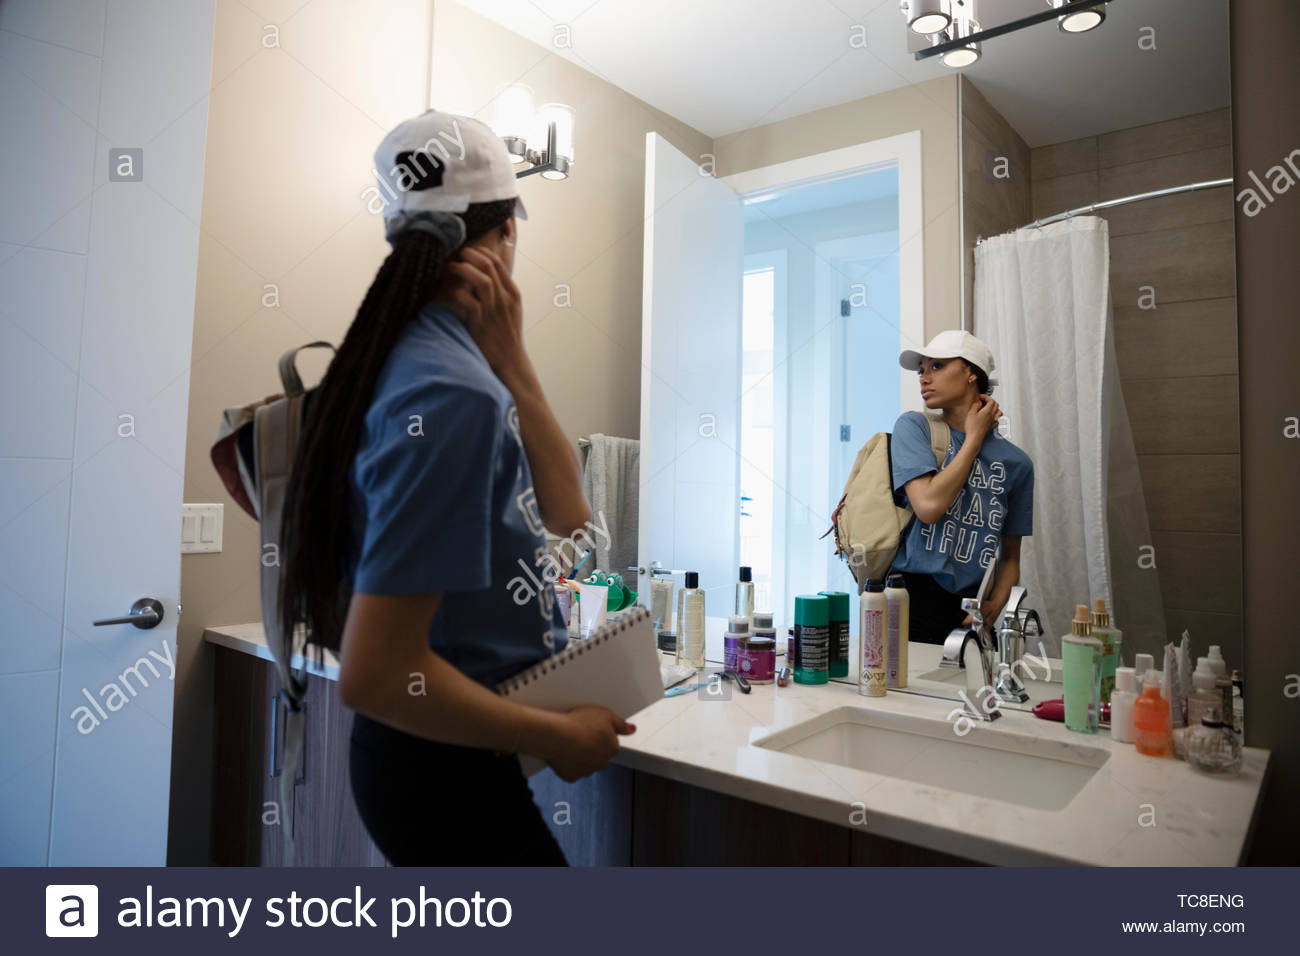 Teenage girl getting ready for work at bathroom mirror Stock Photo